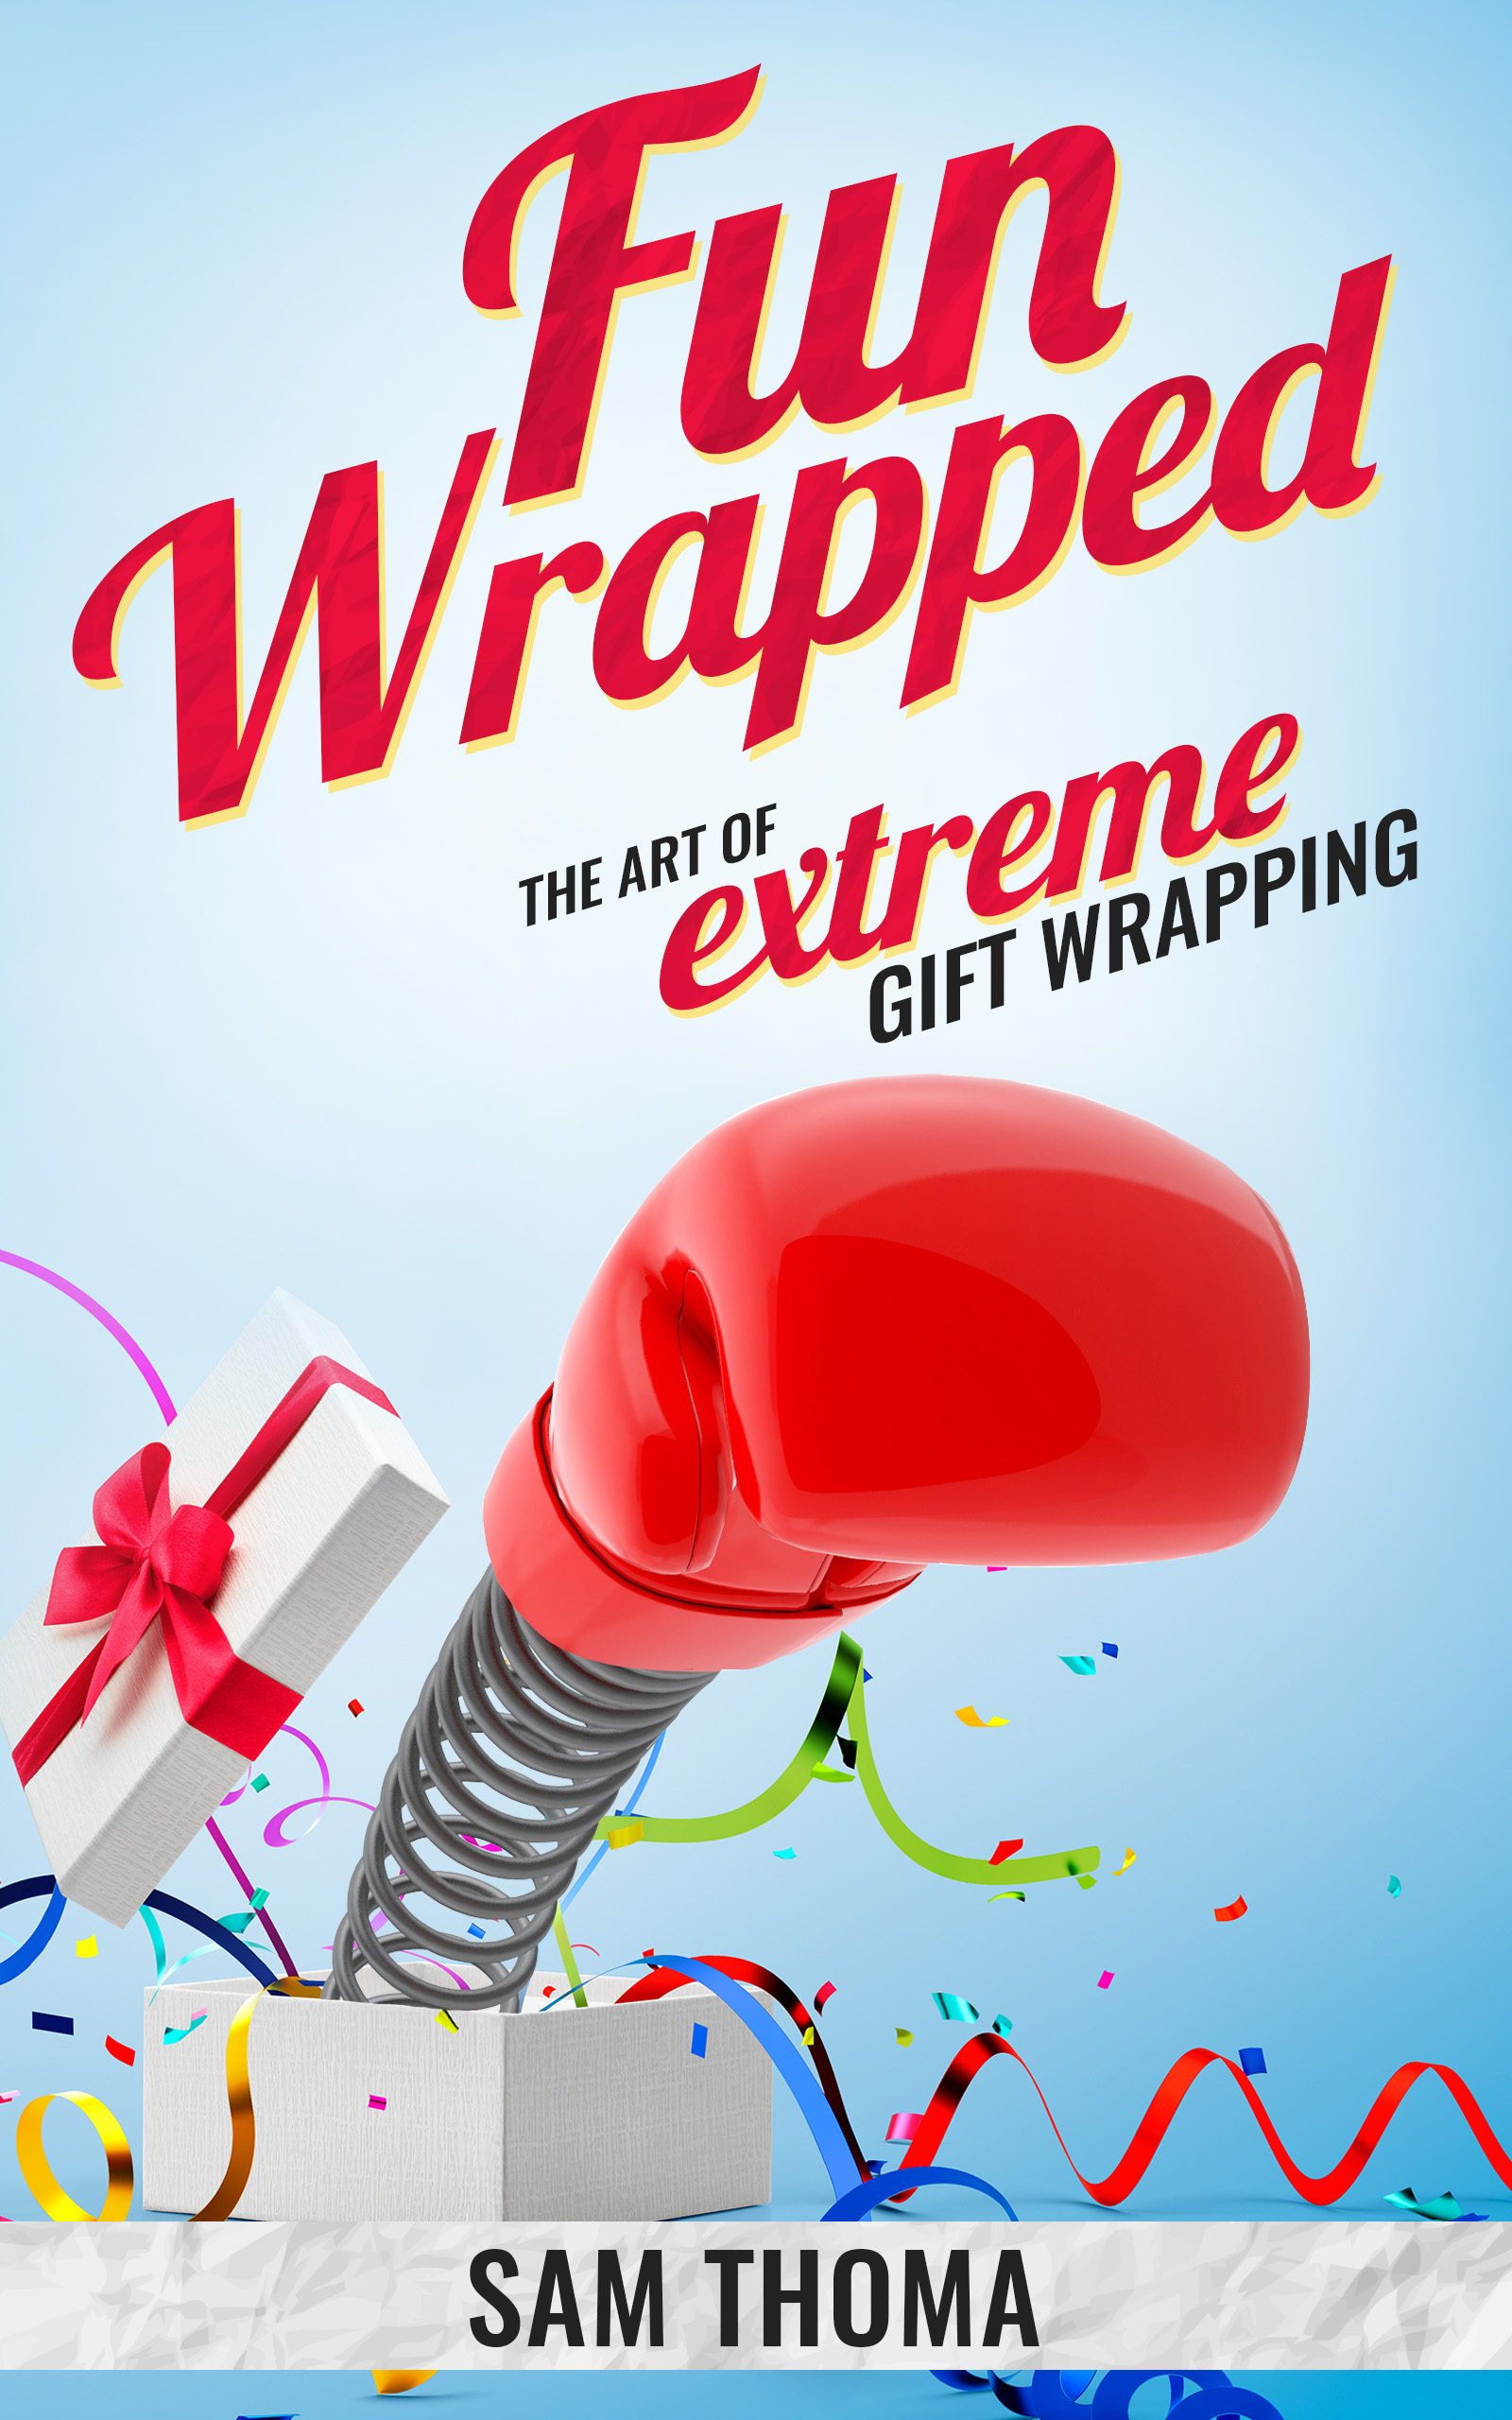 FREE: FunWrapped: The Art of Extreme Gift Wrapping by Sam Thoma